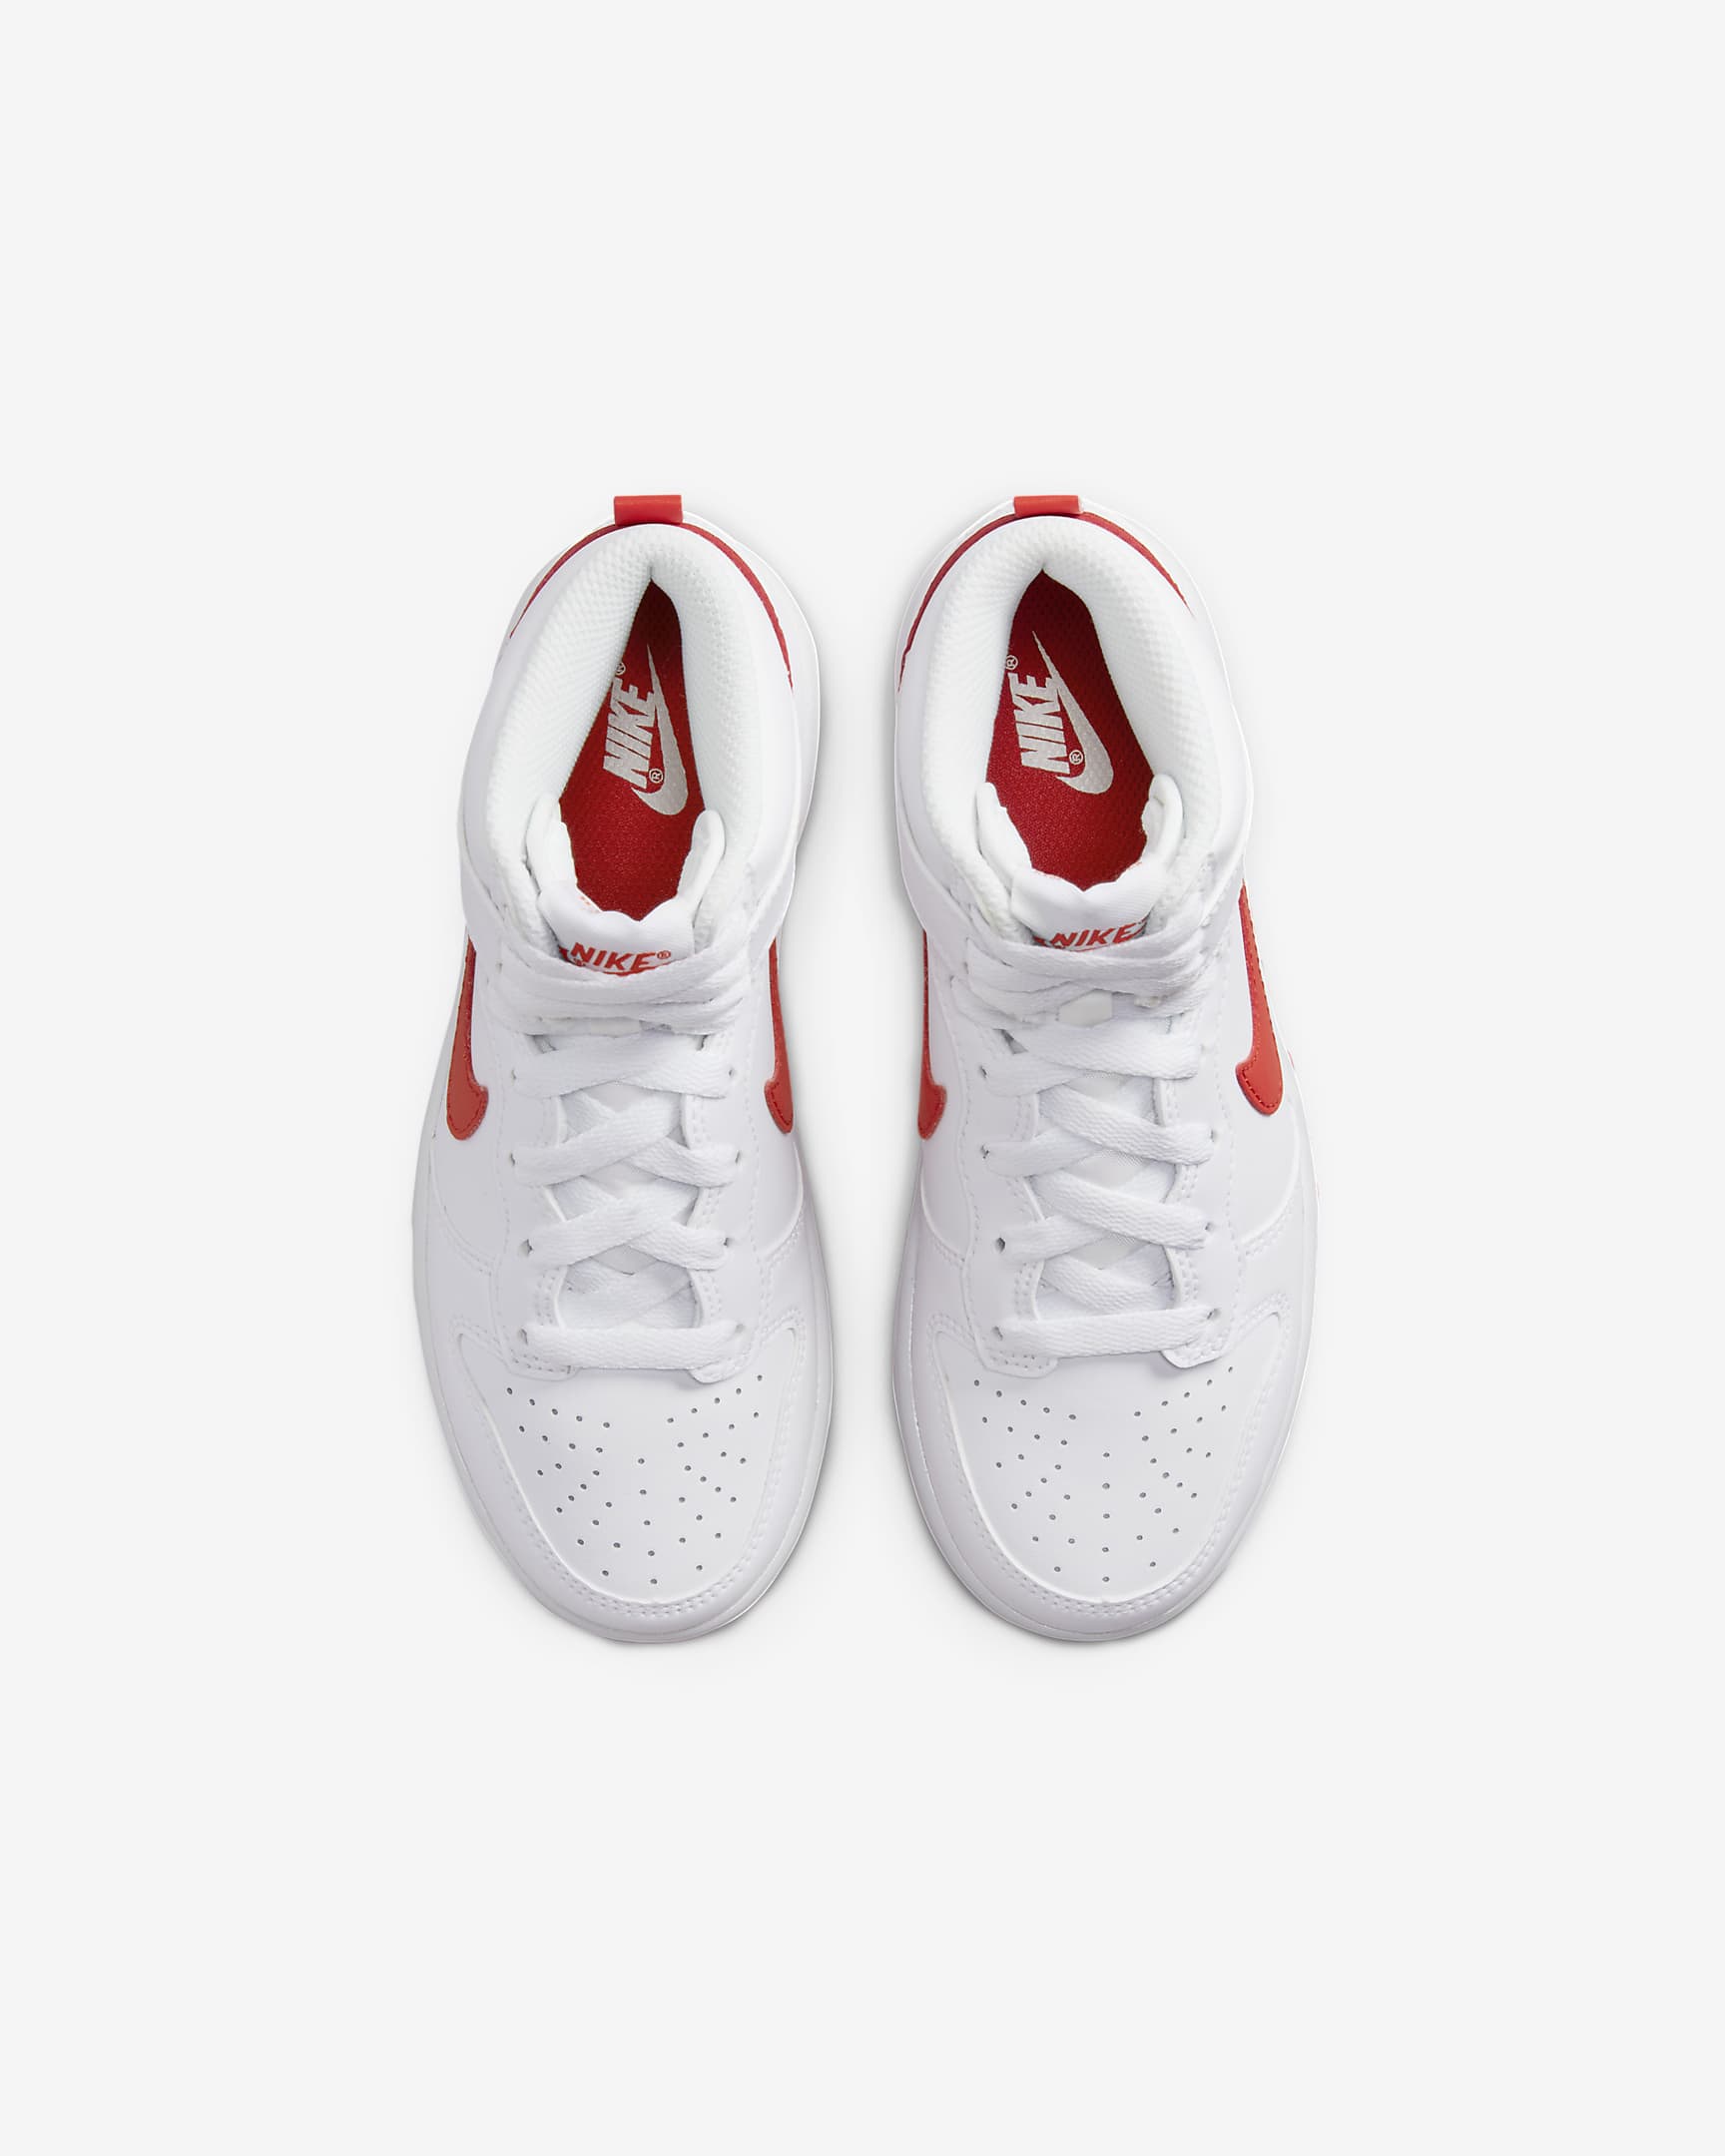 Nike Dunk High Younger Kids' Shoes. Nike IL